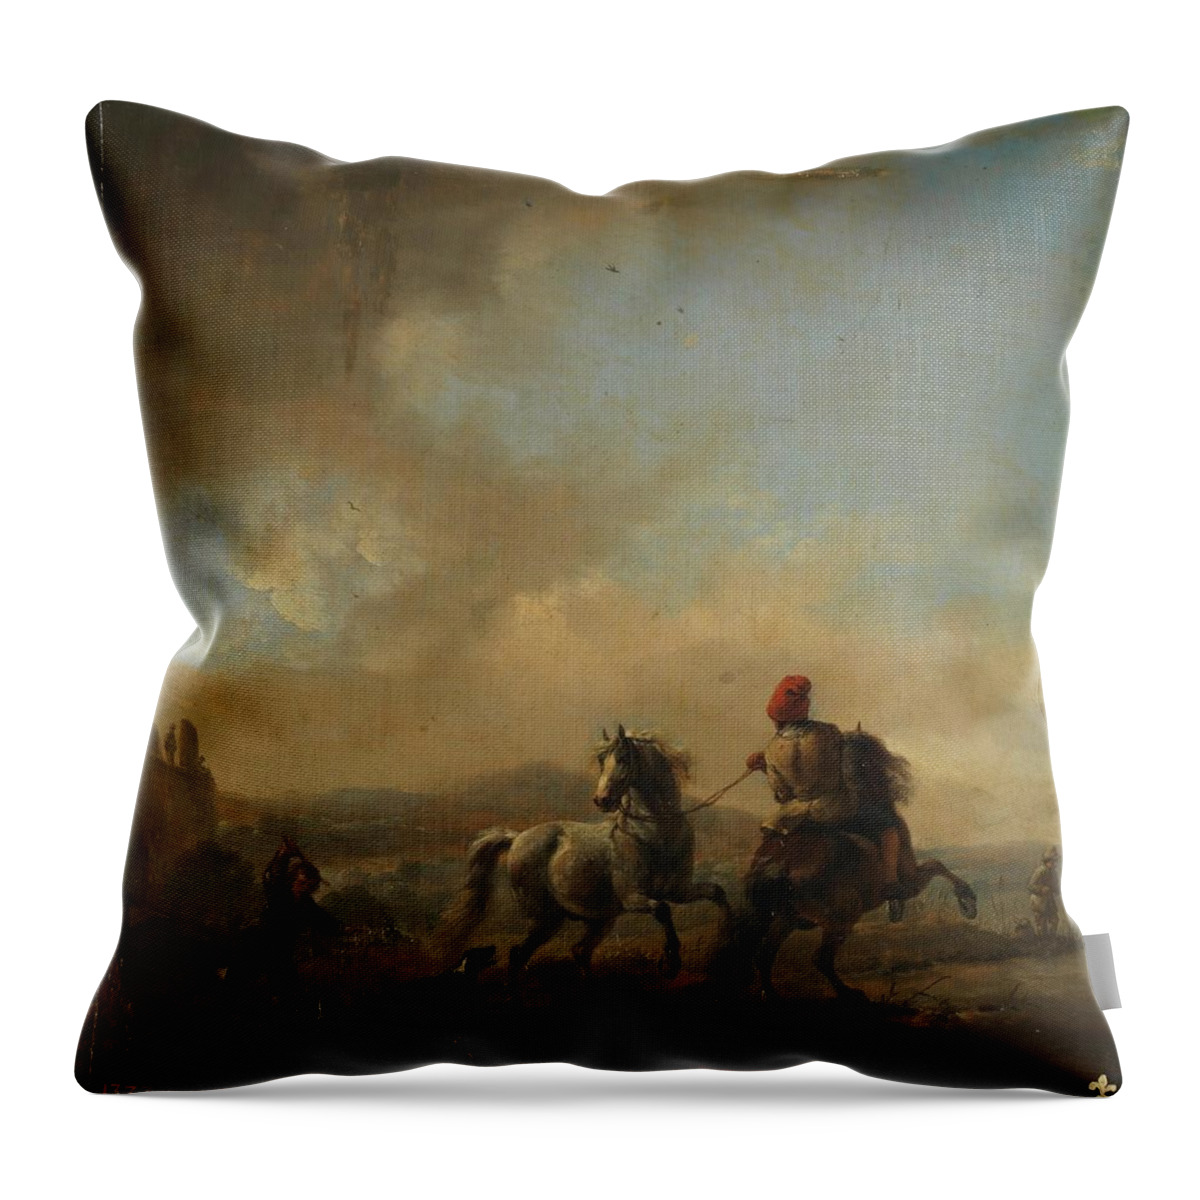 Philips Wouwerman Throw Pillow featuring the painting 'Two Horses', ca. 1650, Dutch School, Oil on panel, 33 cm x 32 cm, P02146. by Philips Wouwerman -1619-1668-